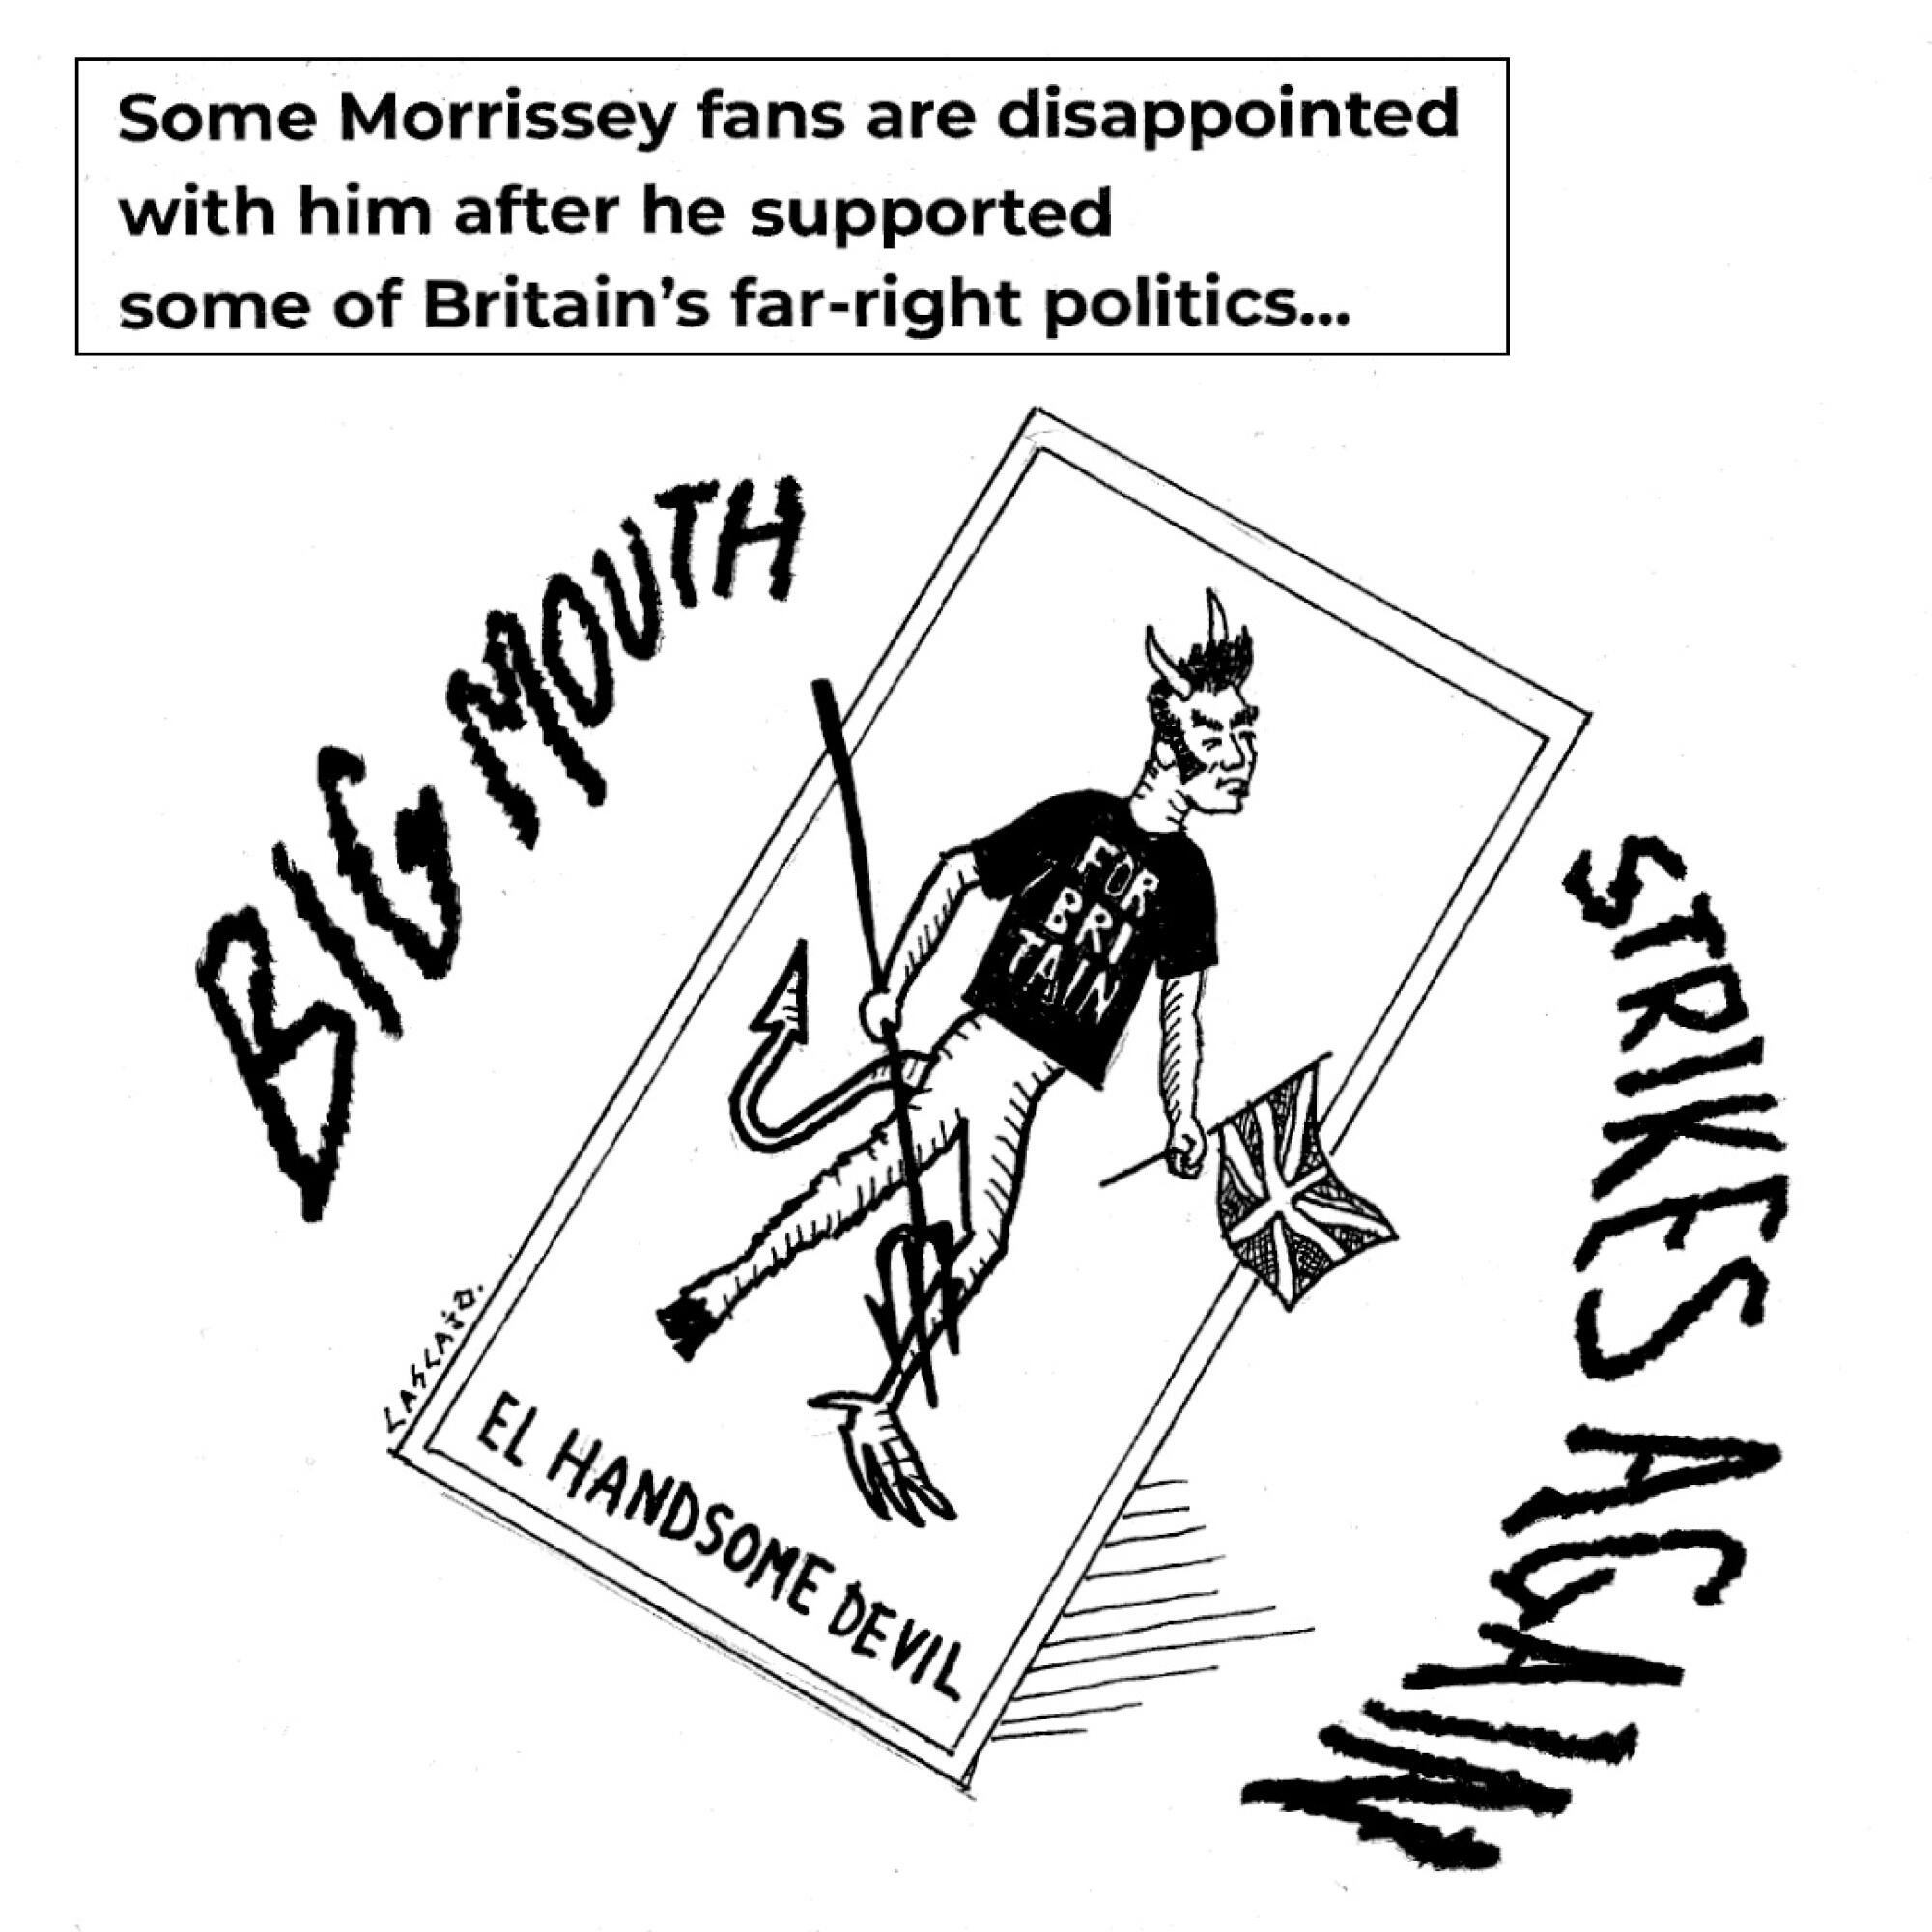 Some Morrissey fans are disappointed with him after his support to some of Britain's far-right politics...